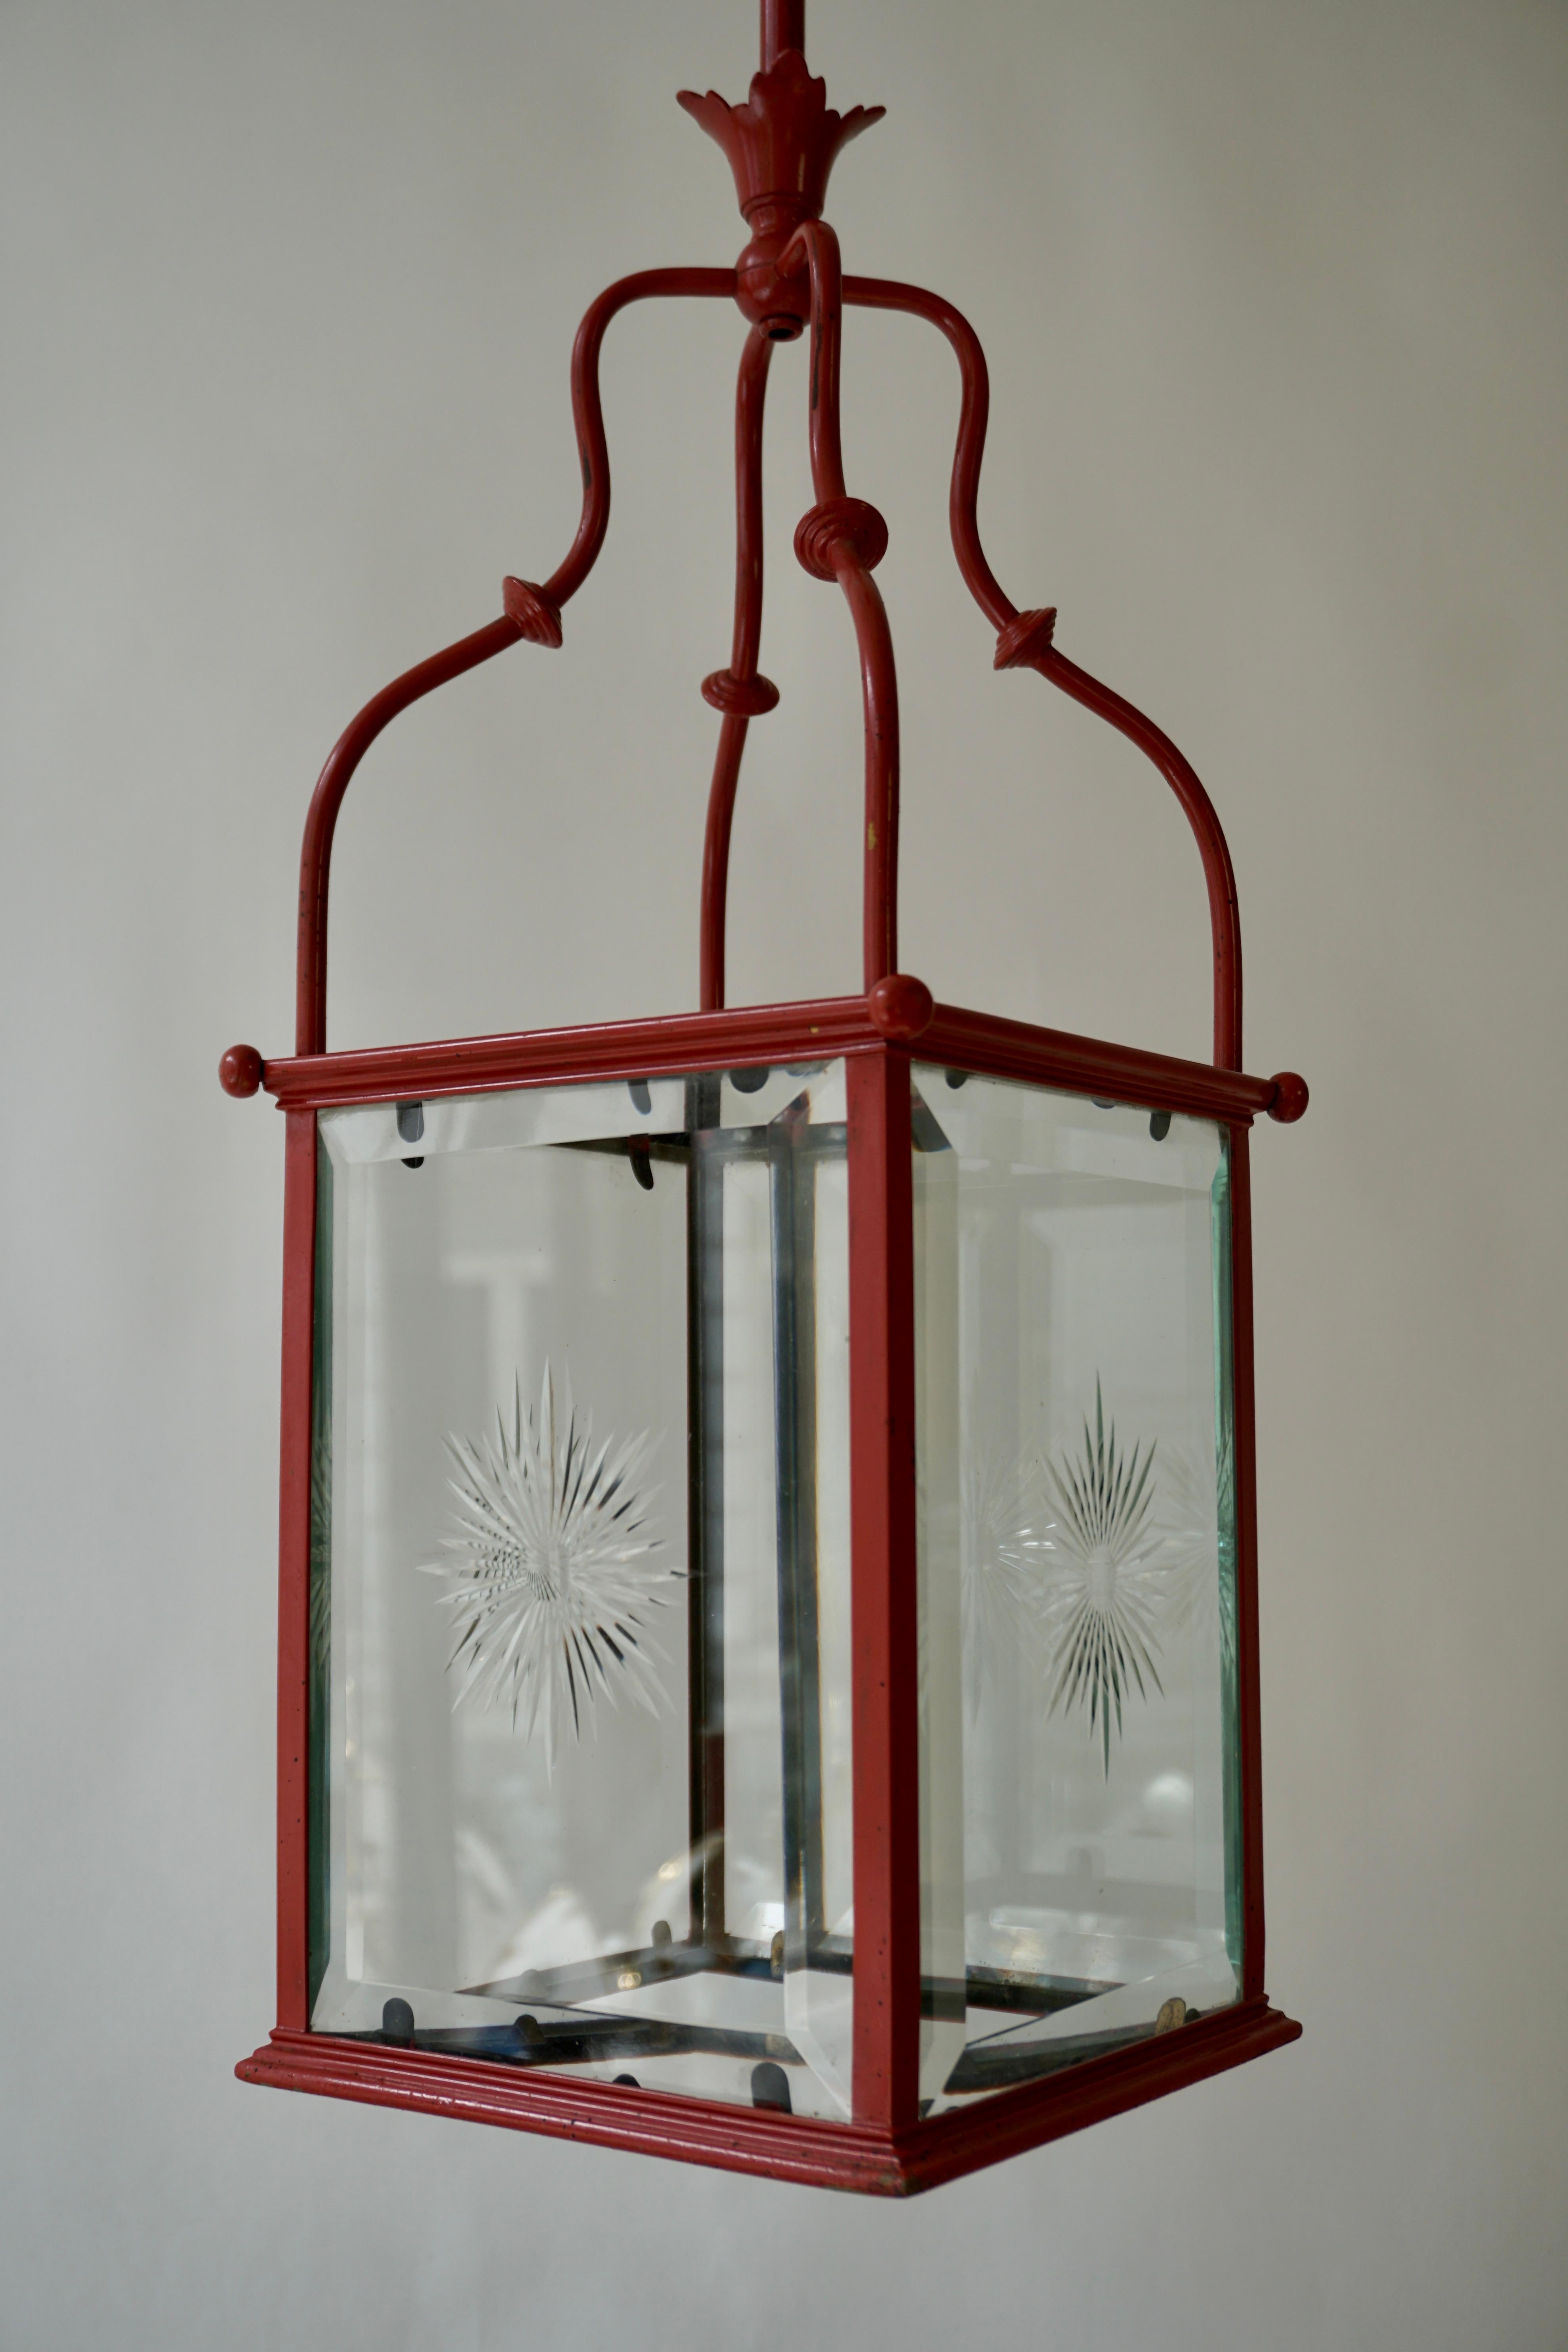 An Italian Red Tole Metal Lantern with Cut Glass, Early 20th C. For Sale 1